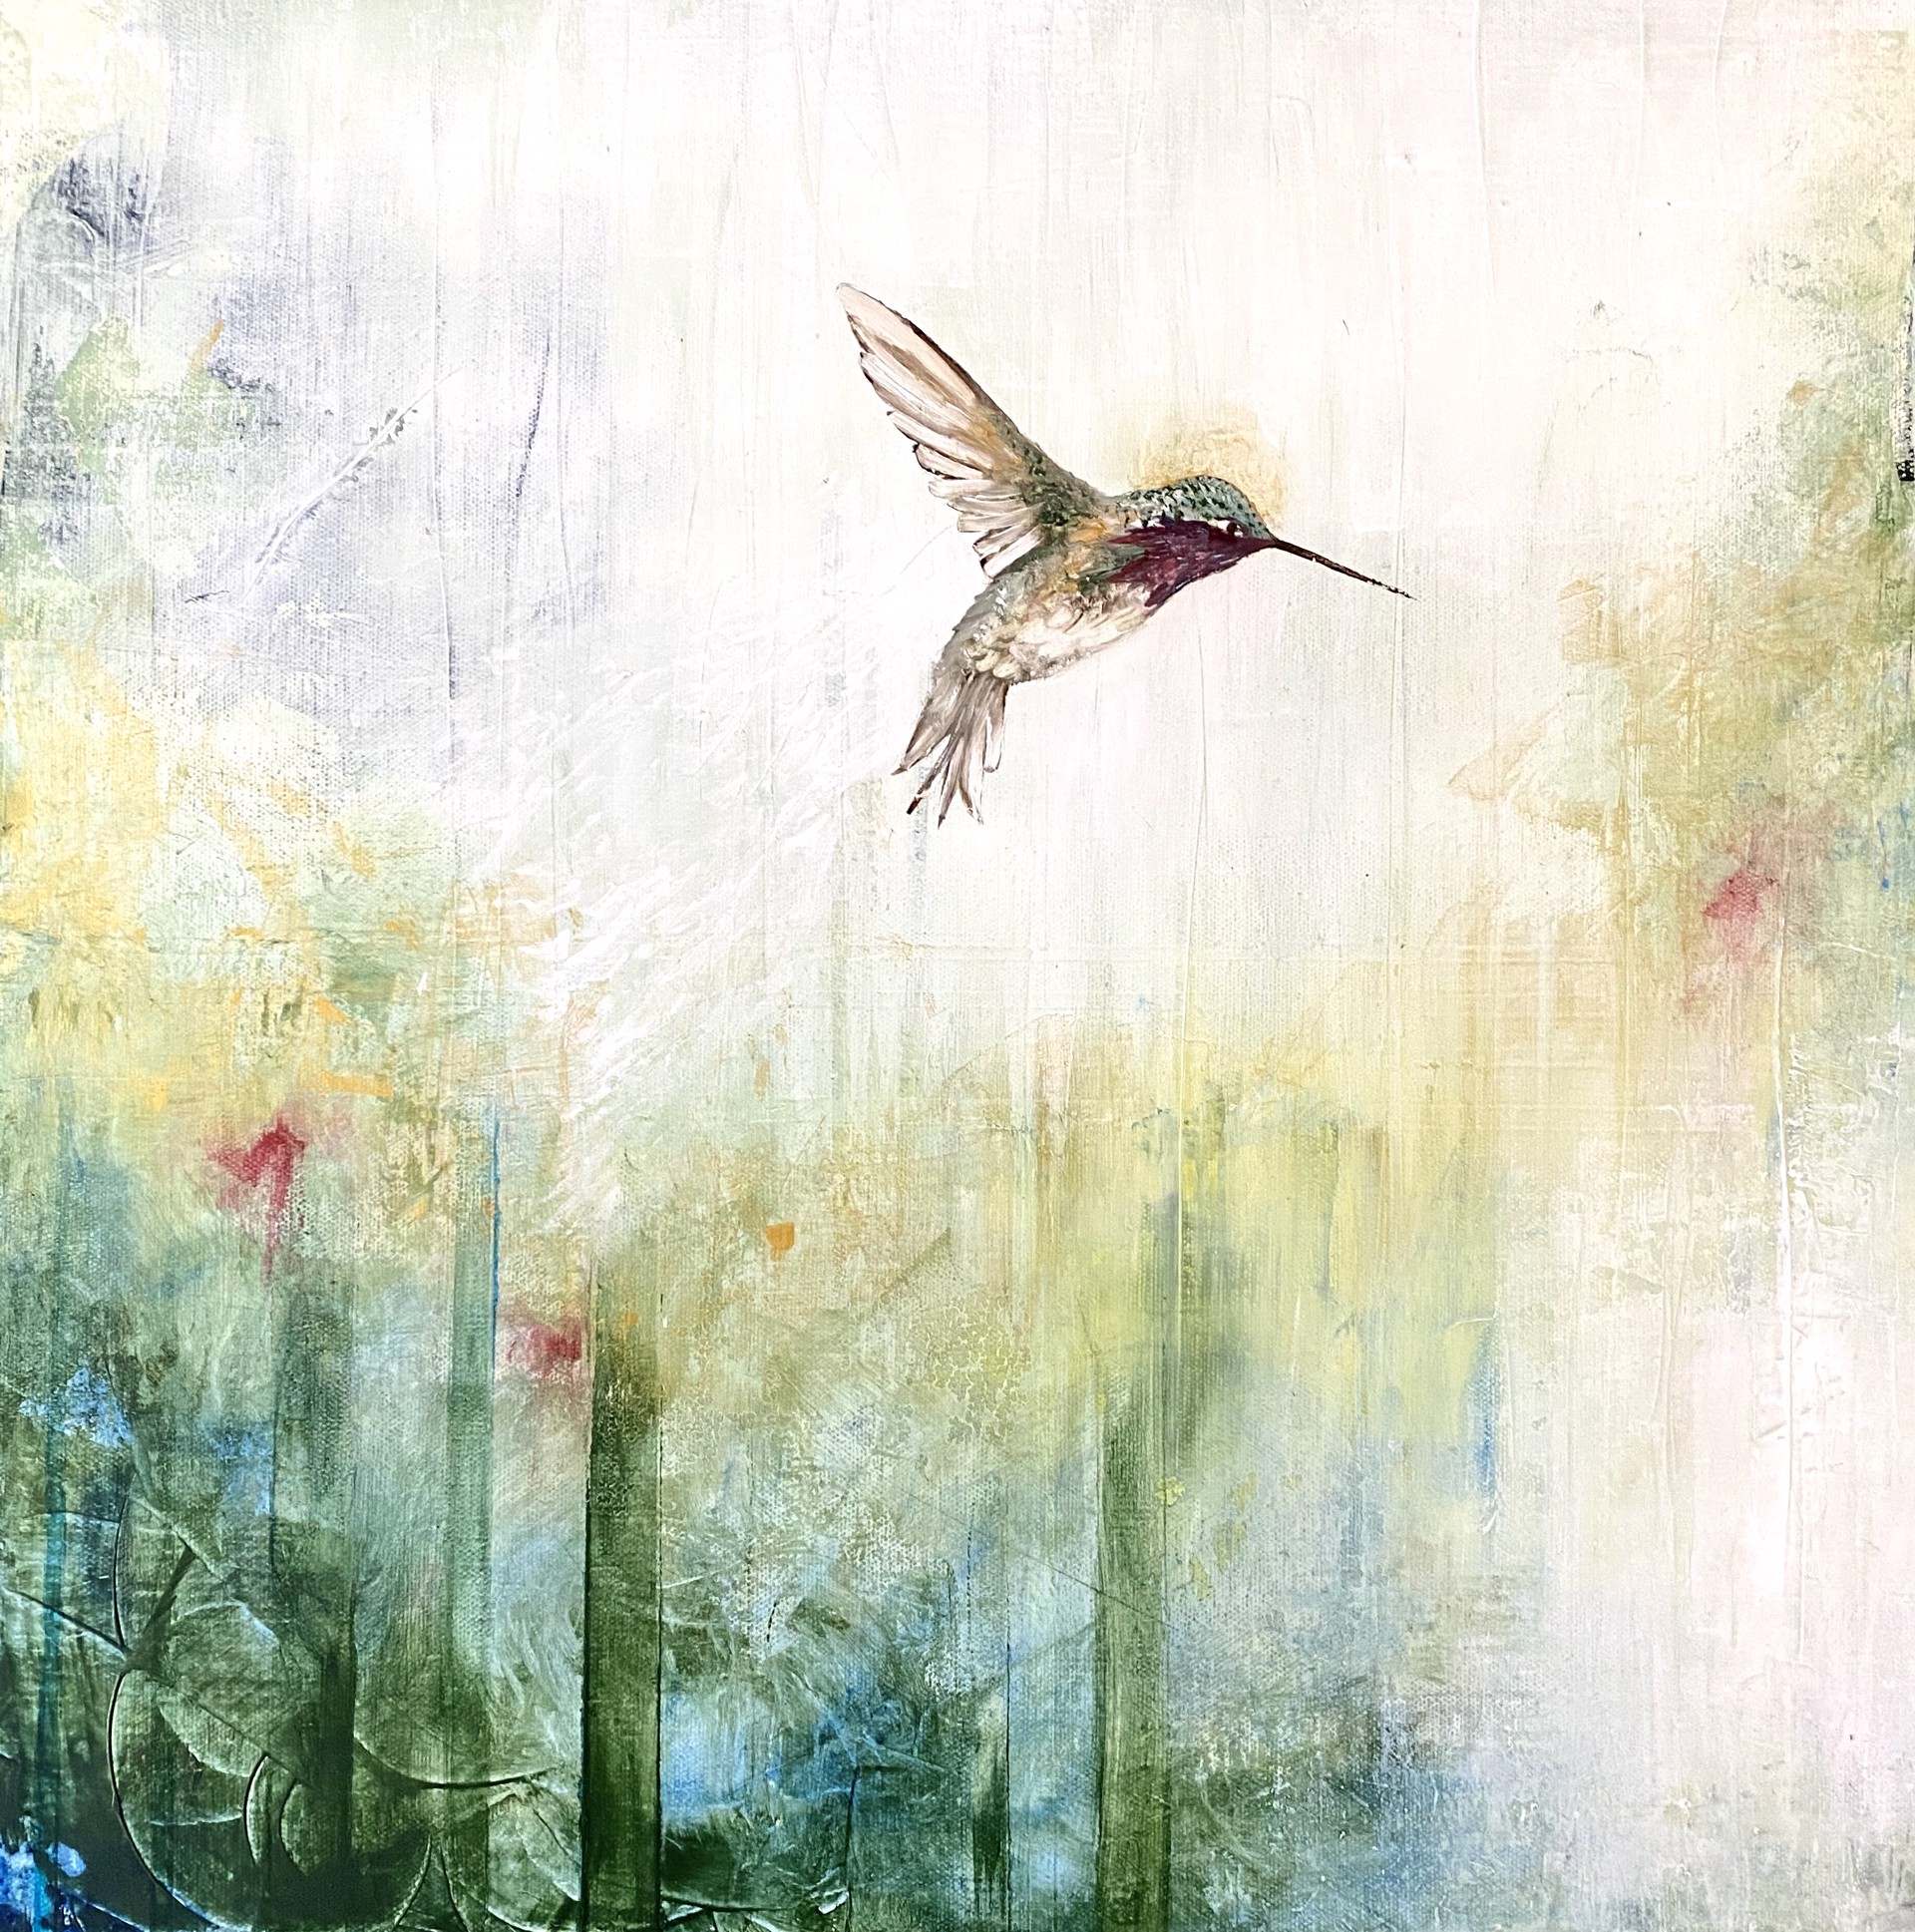 An Original Oil Painting Of A Humming Bird With An Abstract Yellow Green And Blue Background, By Jenna Von Benedikt